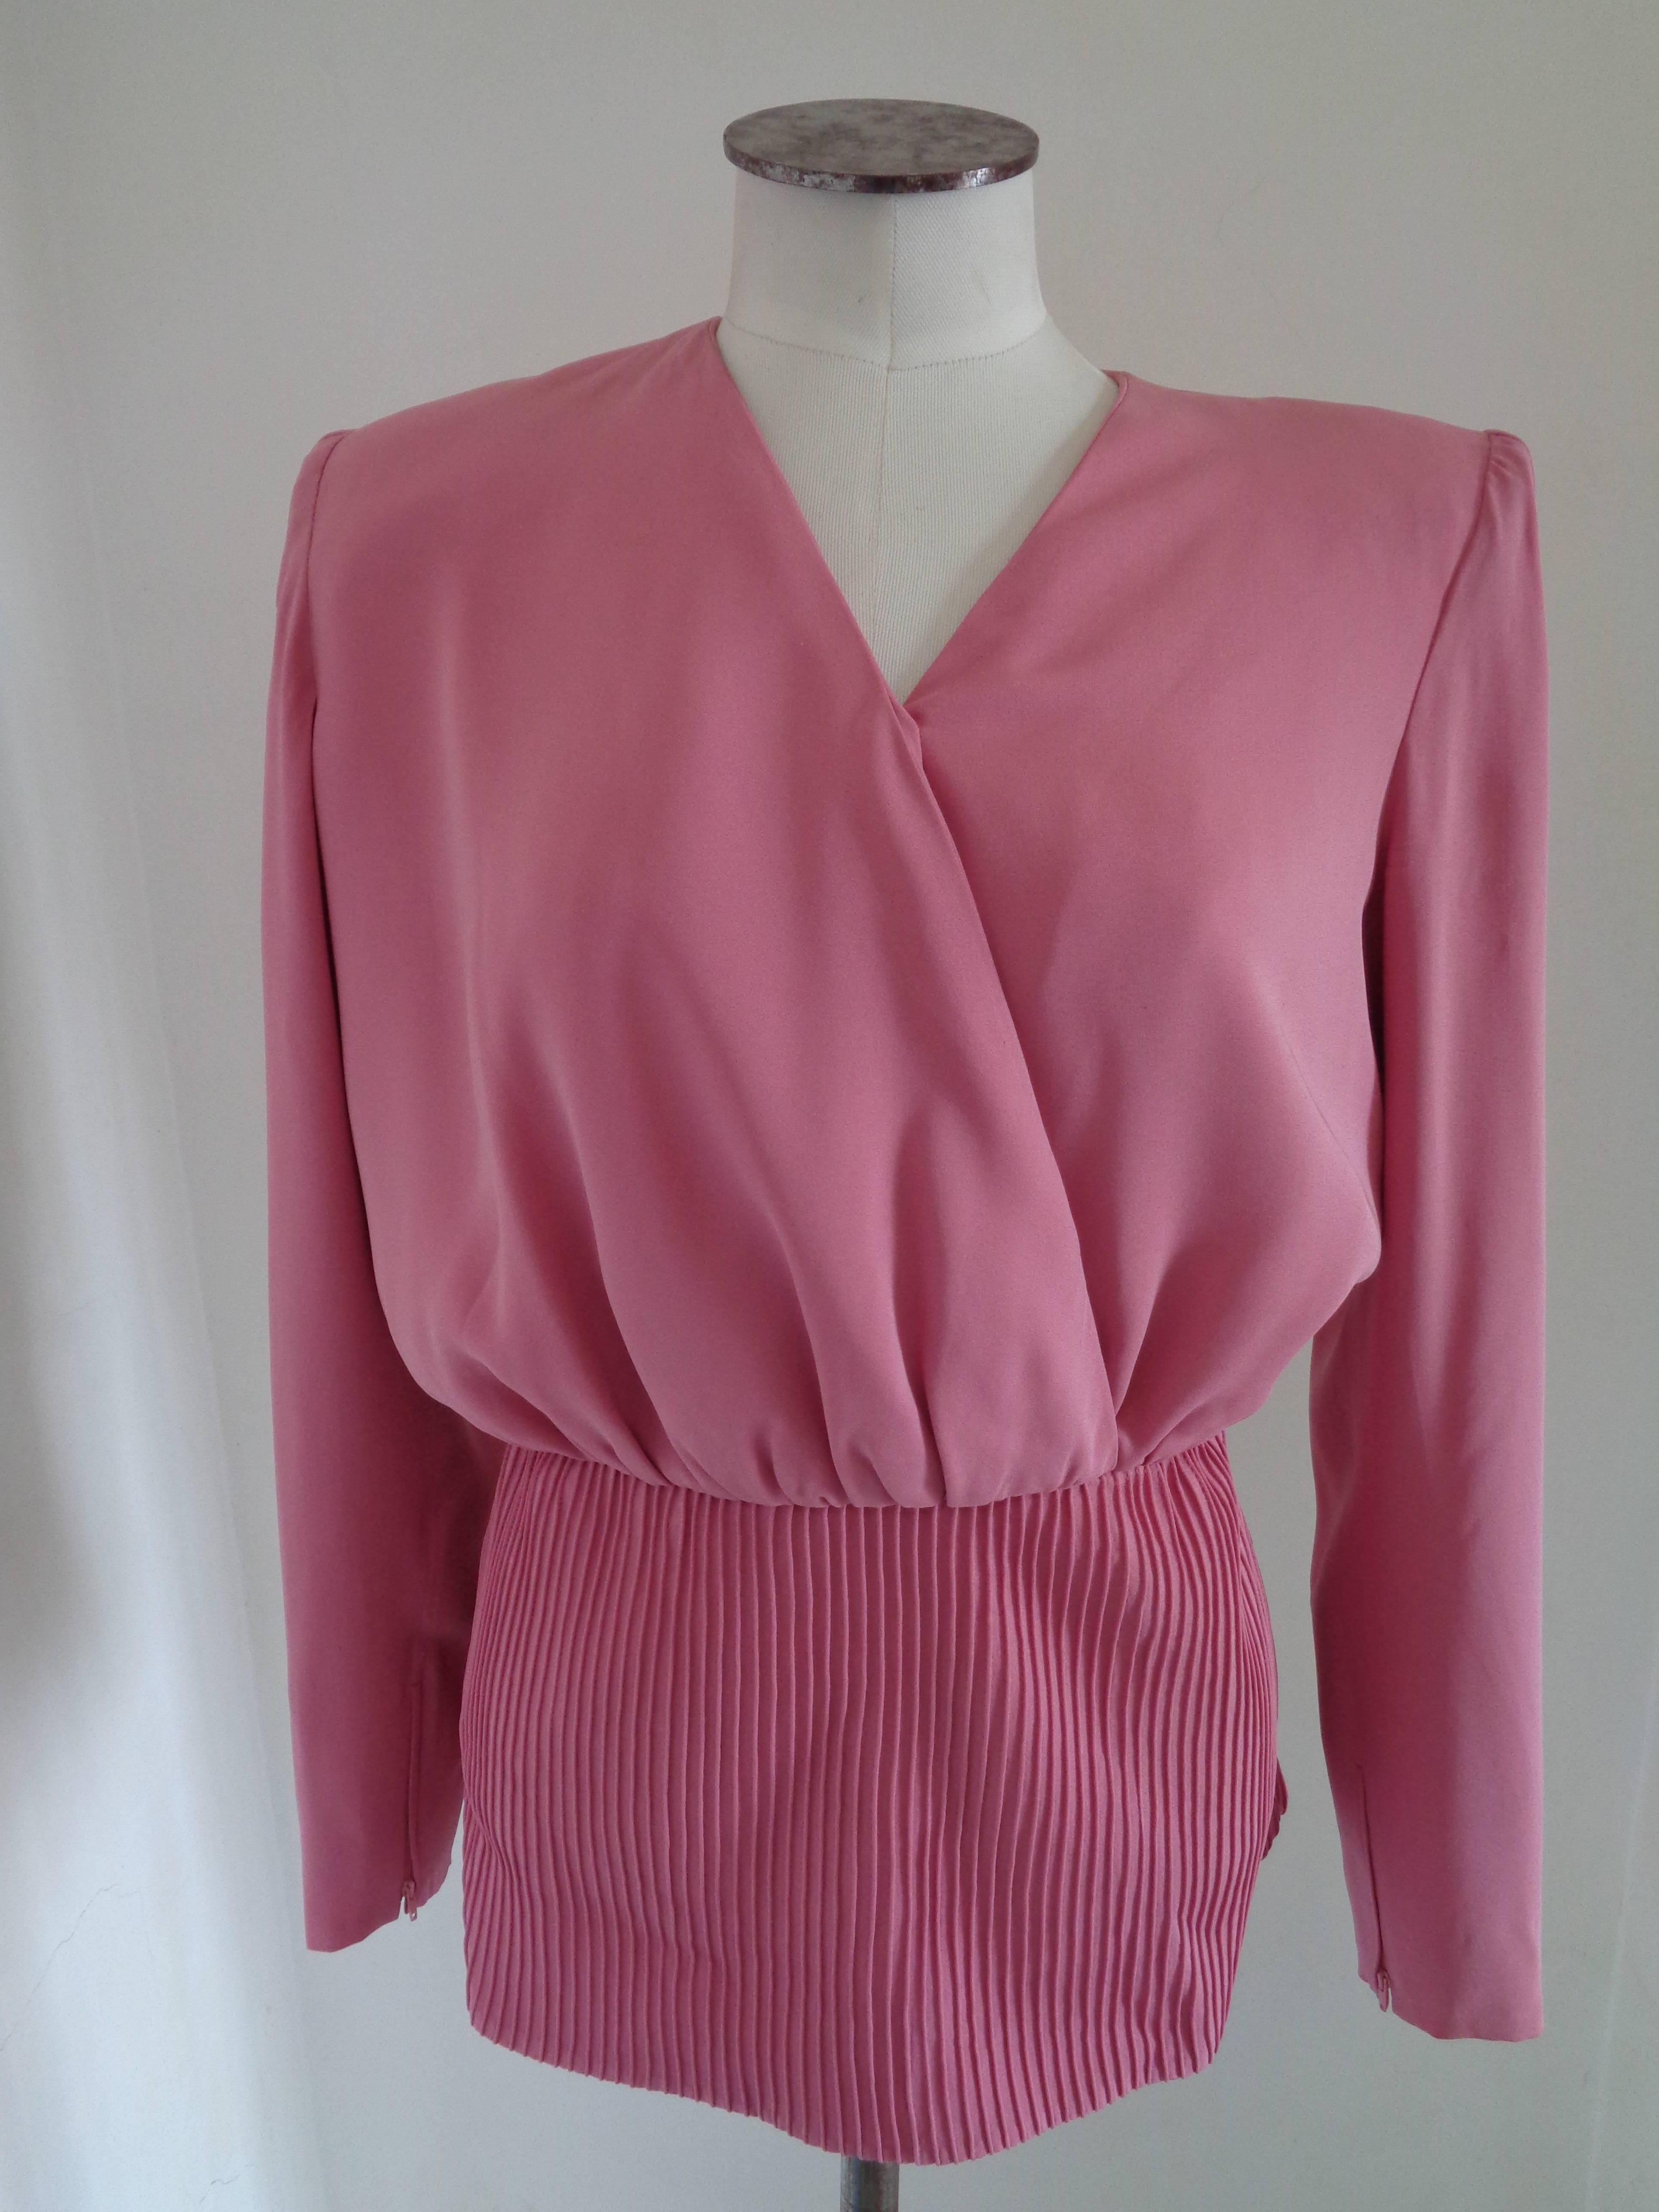 Valentino Boutique Pink Silk Sweater Blouse

Totally made in italy still with tags in size 8

Composition: Silk

Lining: Cupro and Rayon